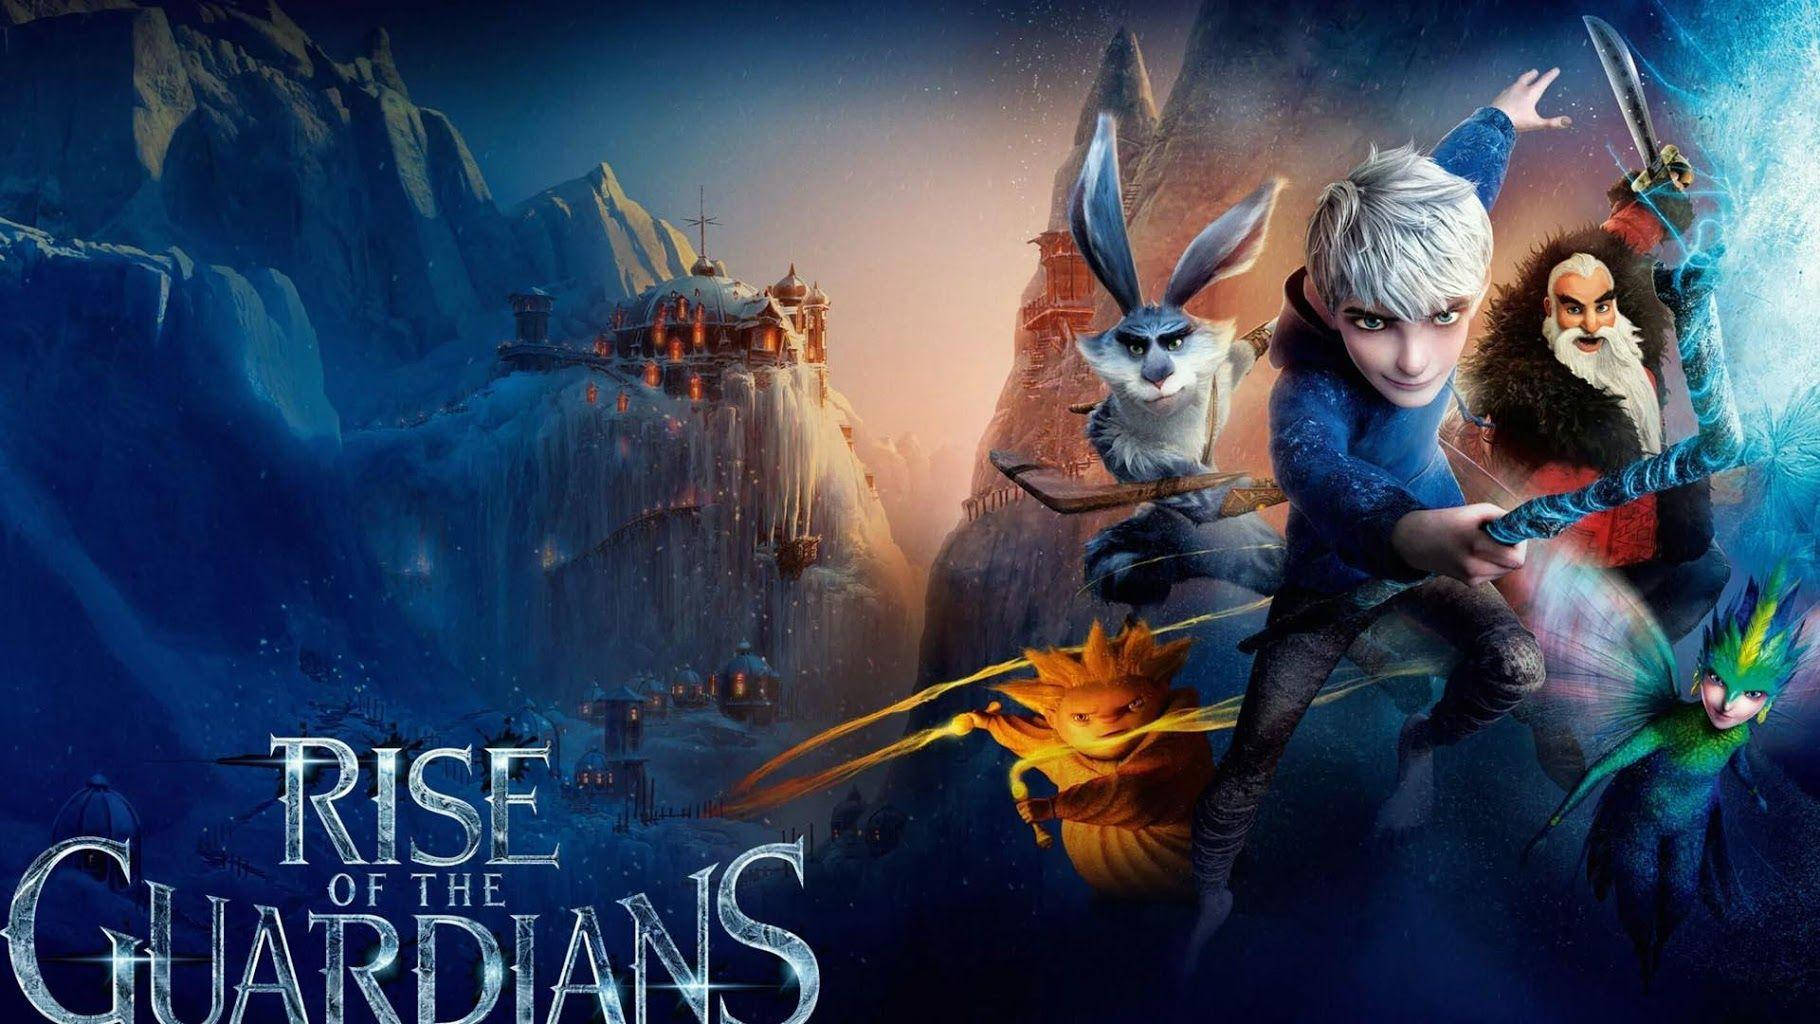 Epic Adventure in Rise of The Guardians Wallpaper